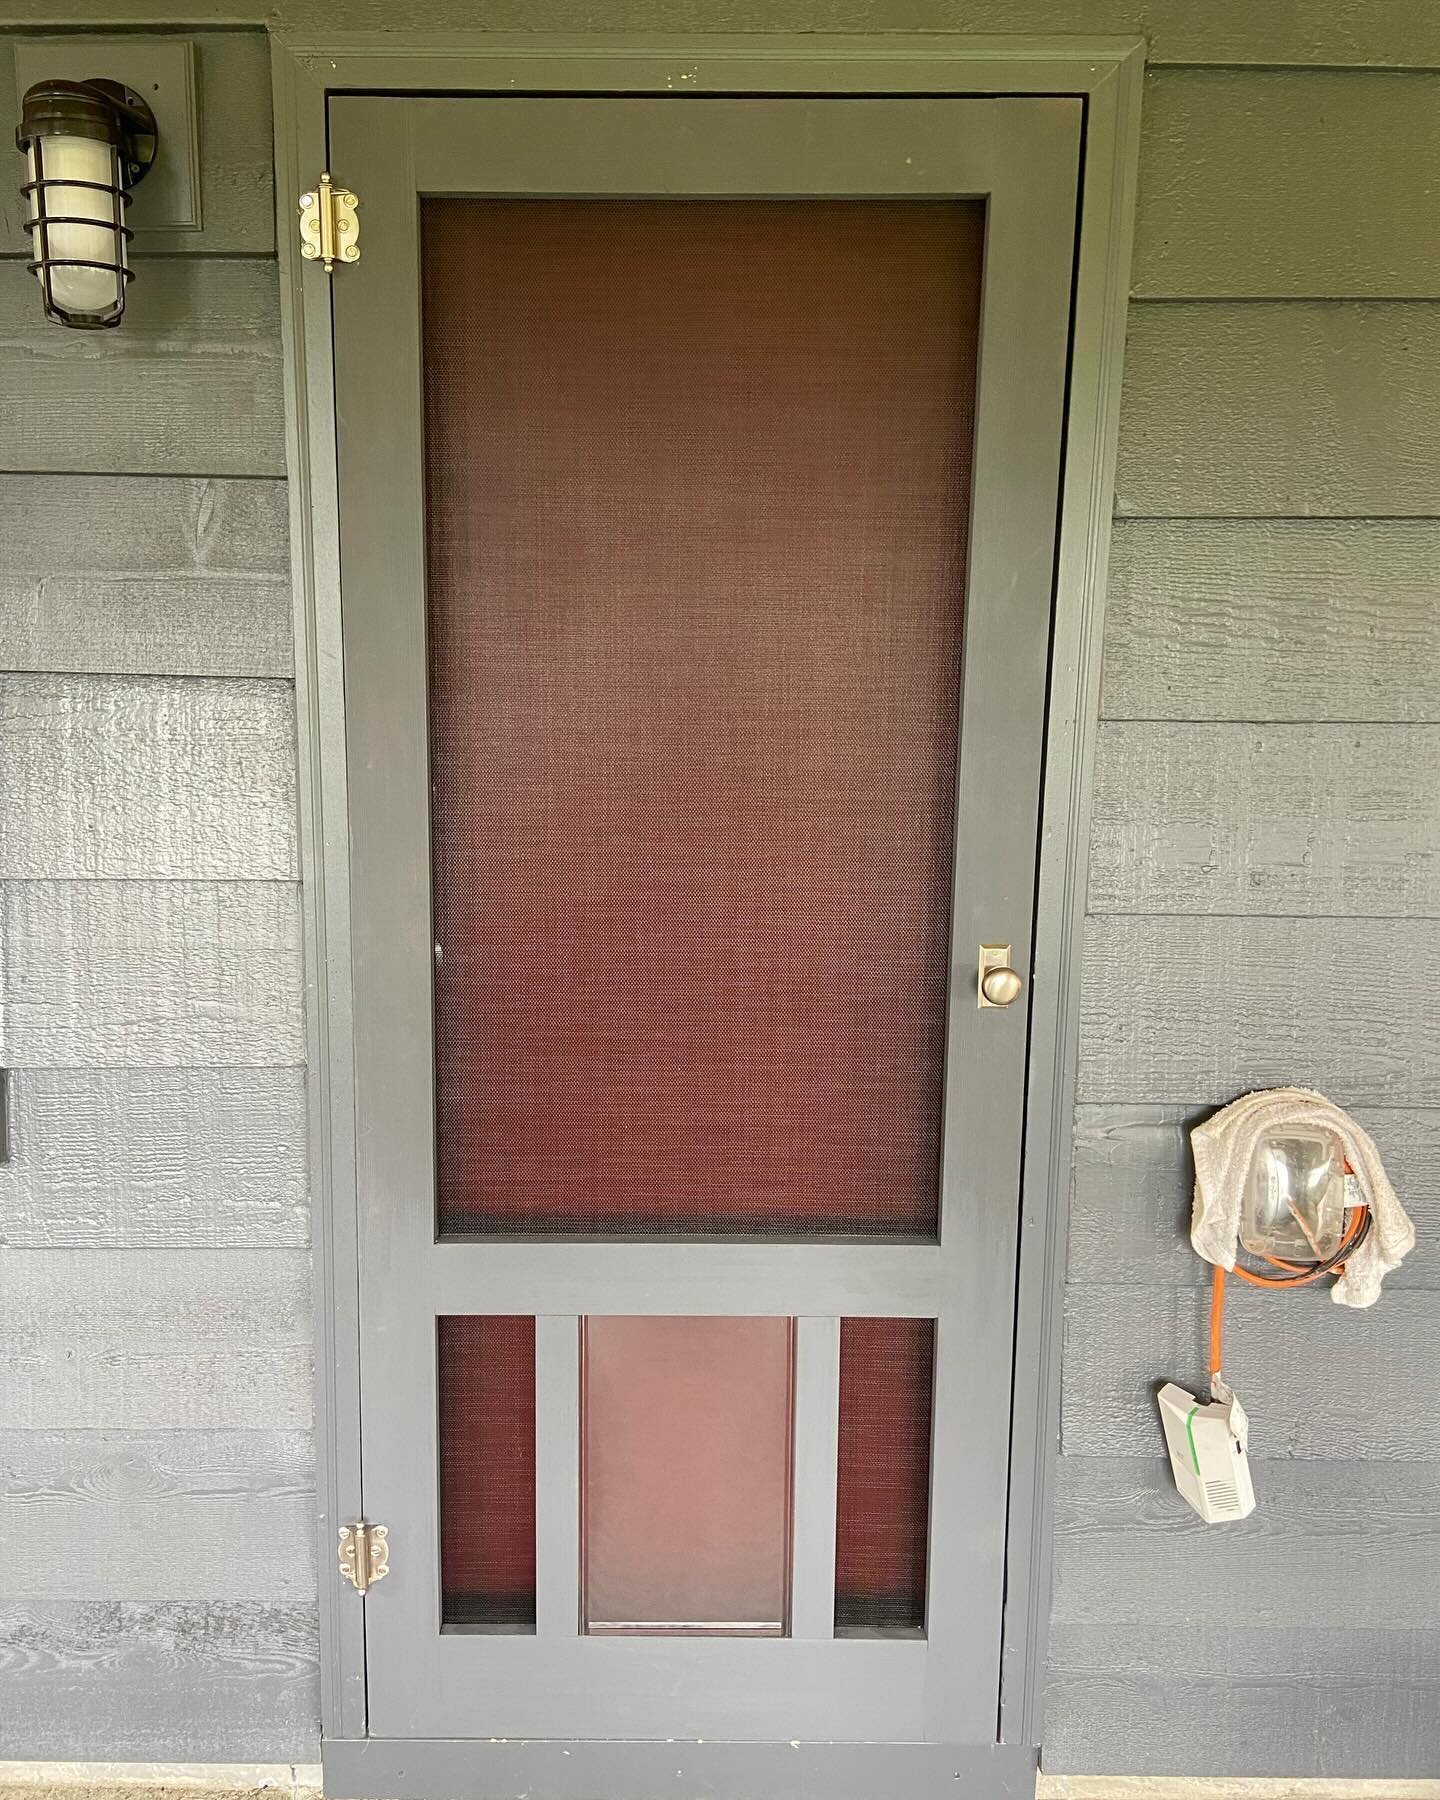 This home in Seward Park has an incredible backyard for their two Corgi pups (and their furry friends) to run around in. Naturally, they needed a doggie door in their screen door so those energetic pups could run and play free without having to const